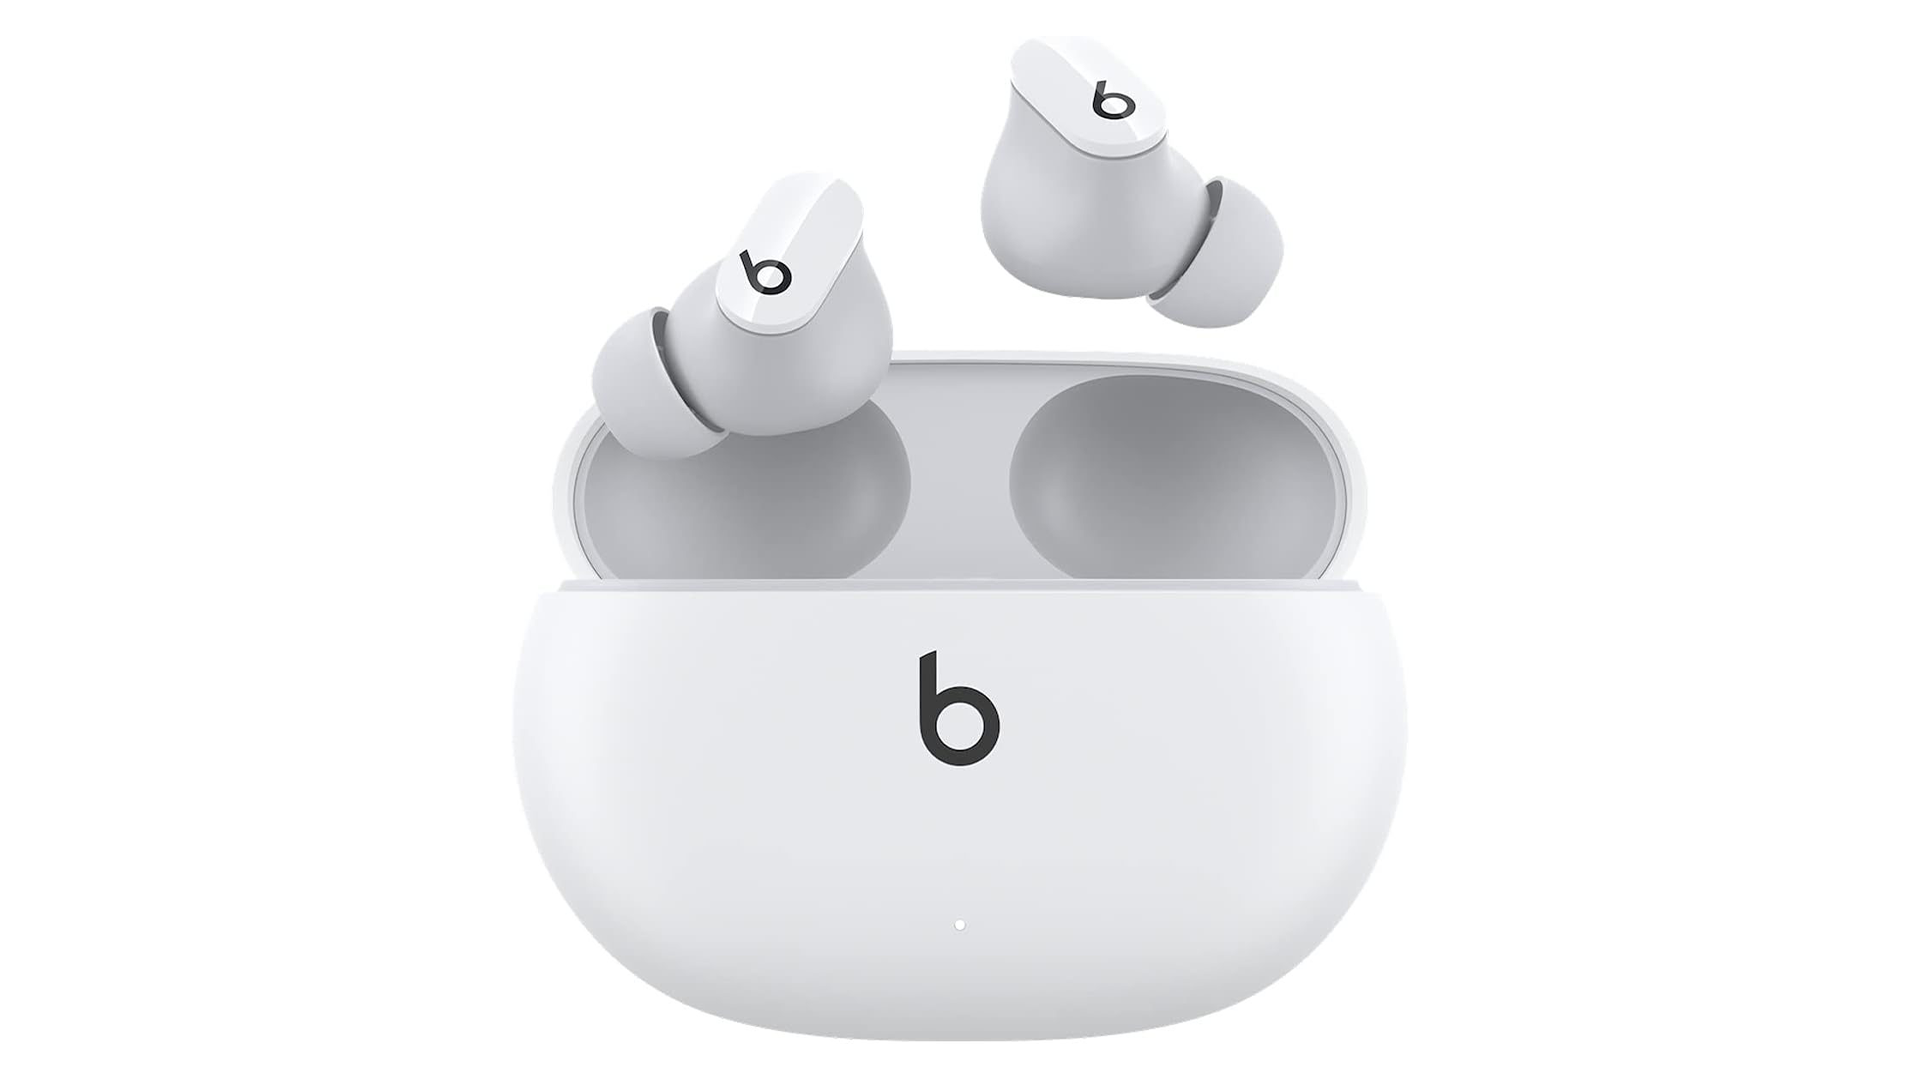 A great gift for Mum – a pair of white Beats Studio Buds with their charging case.